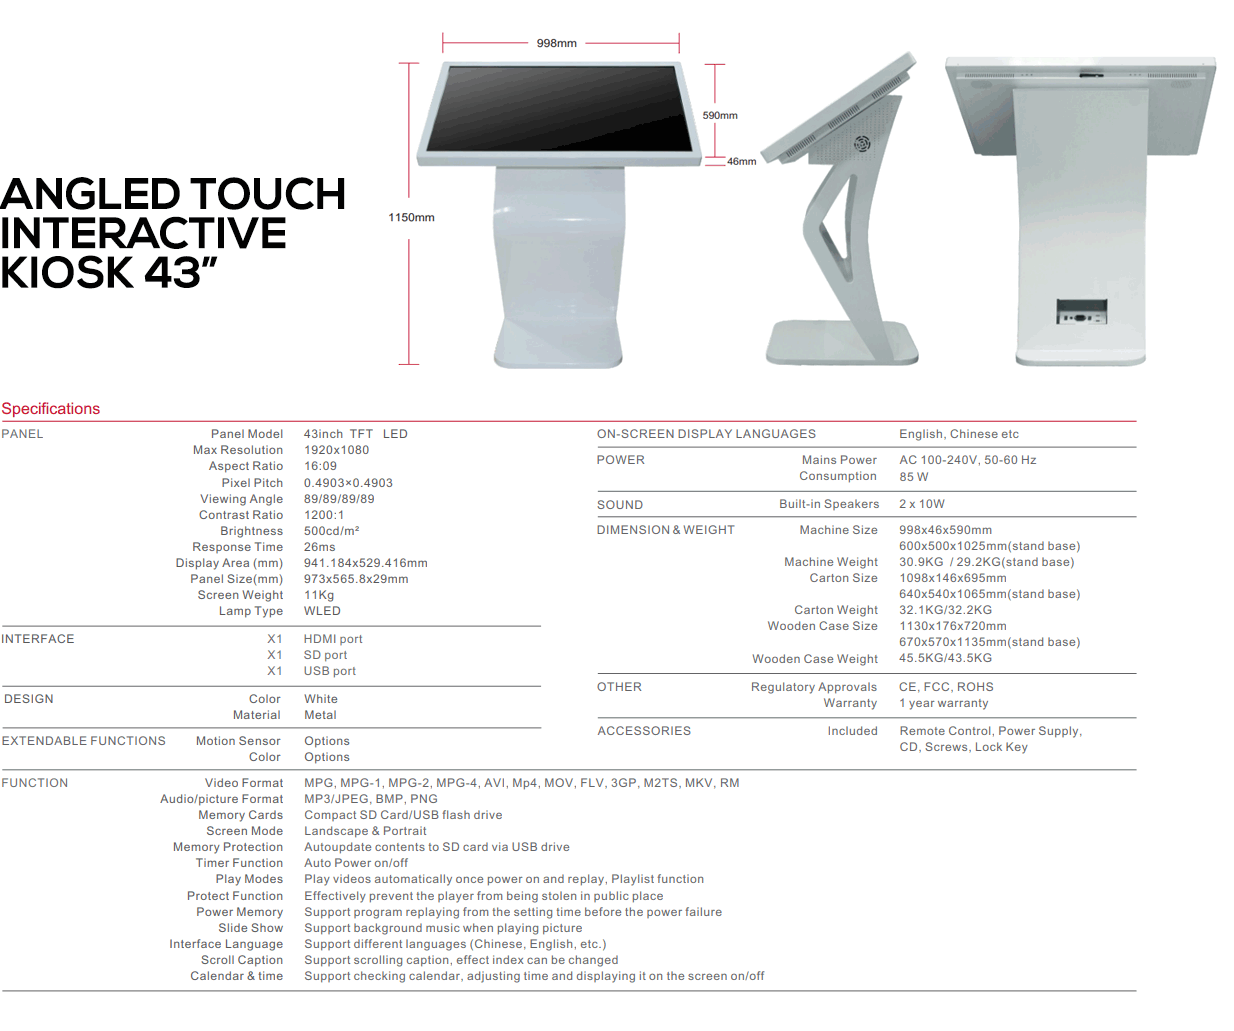 ANGLED TOUCH 43 specs